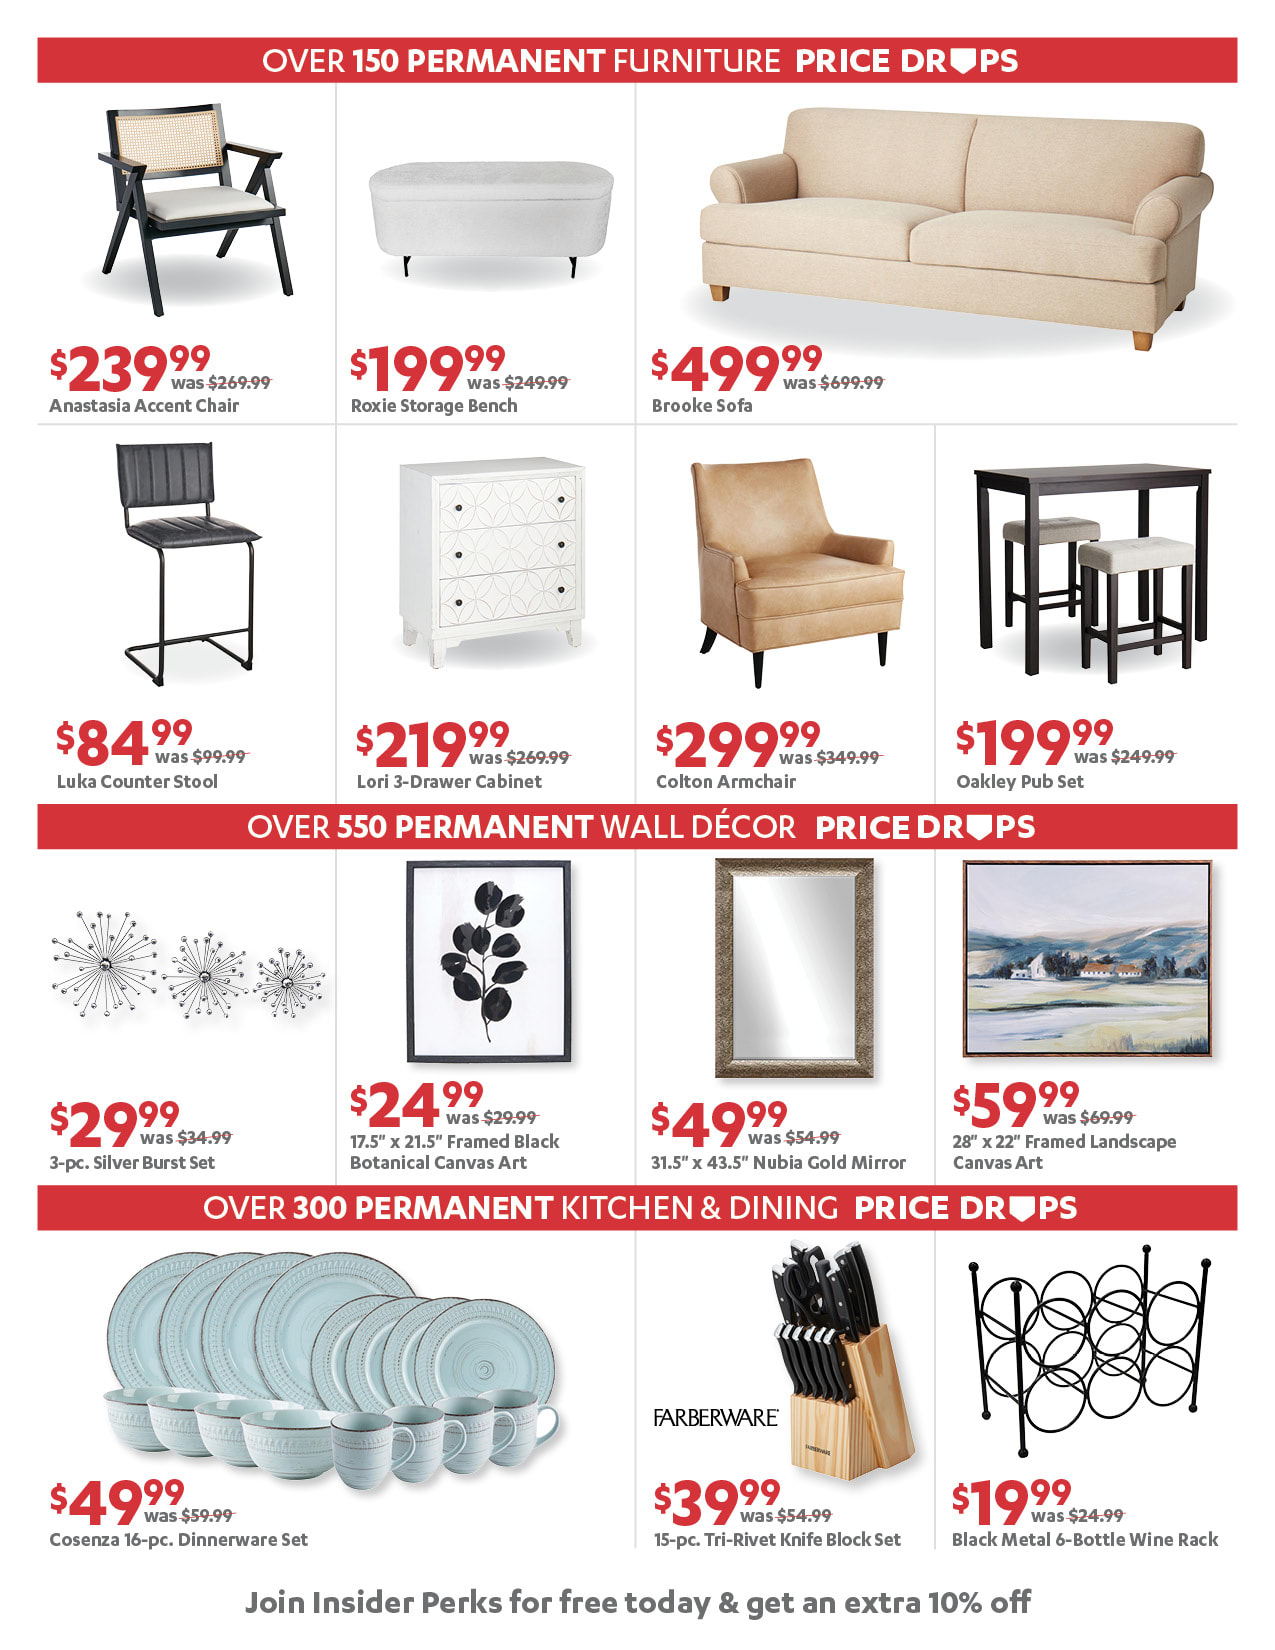 Weekly Ad, Home Decor Weekly Deals & Price Drops